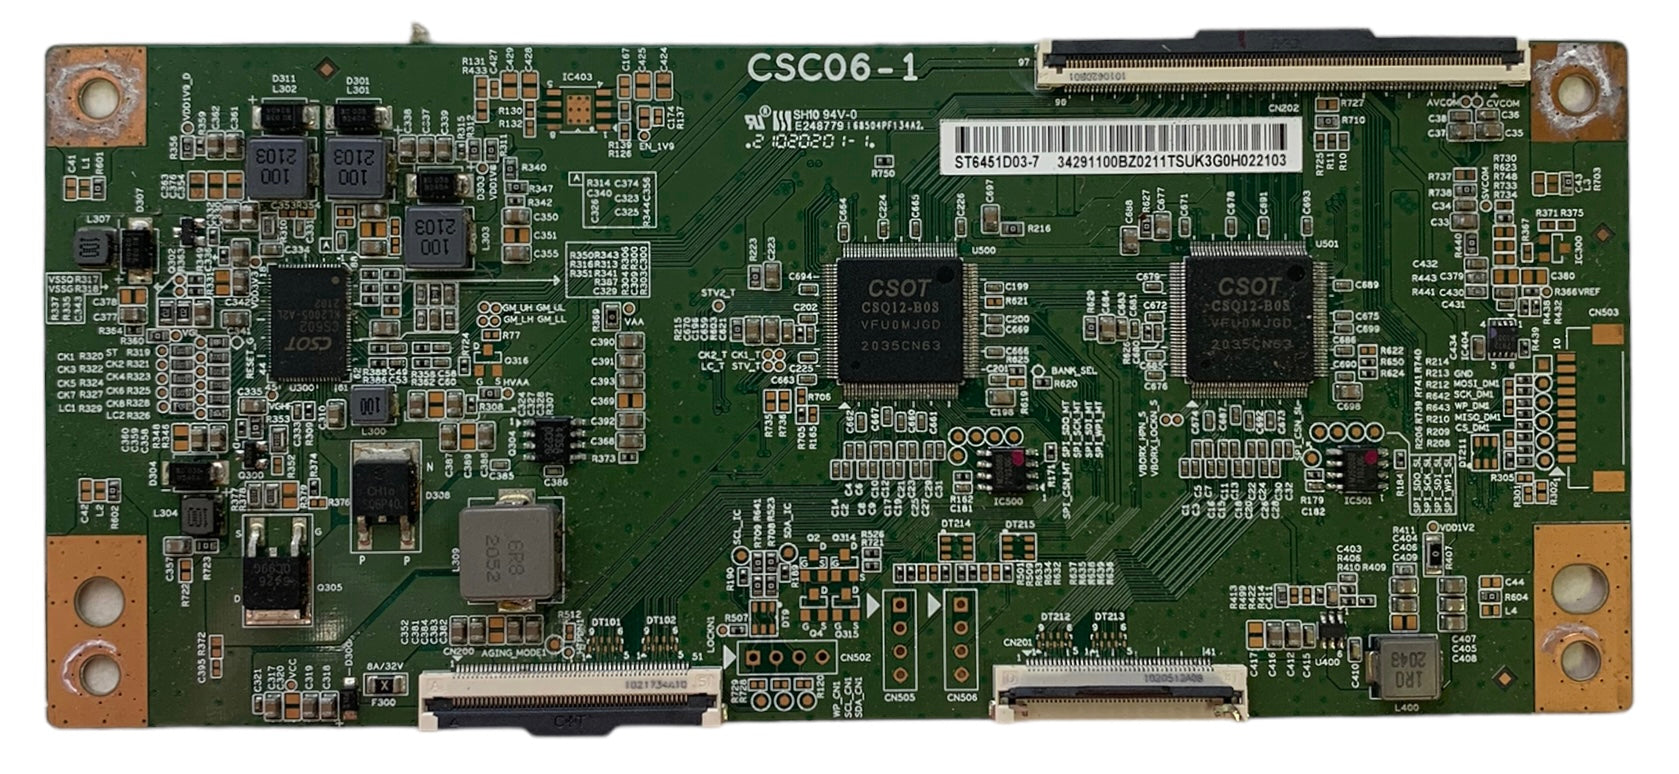 TCL 34.29110.0BZ (ST6451D03-7) T-Con Board